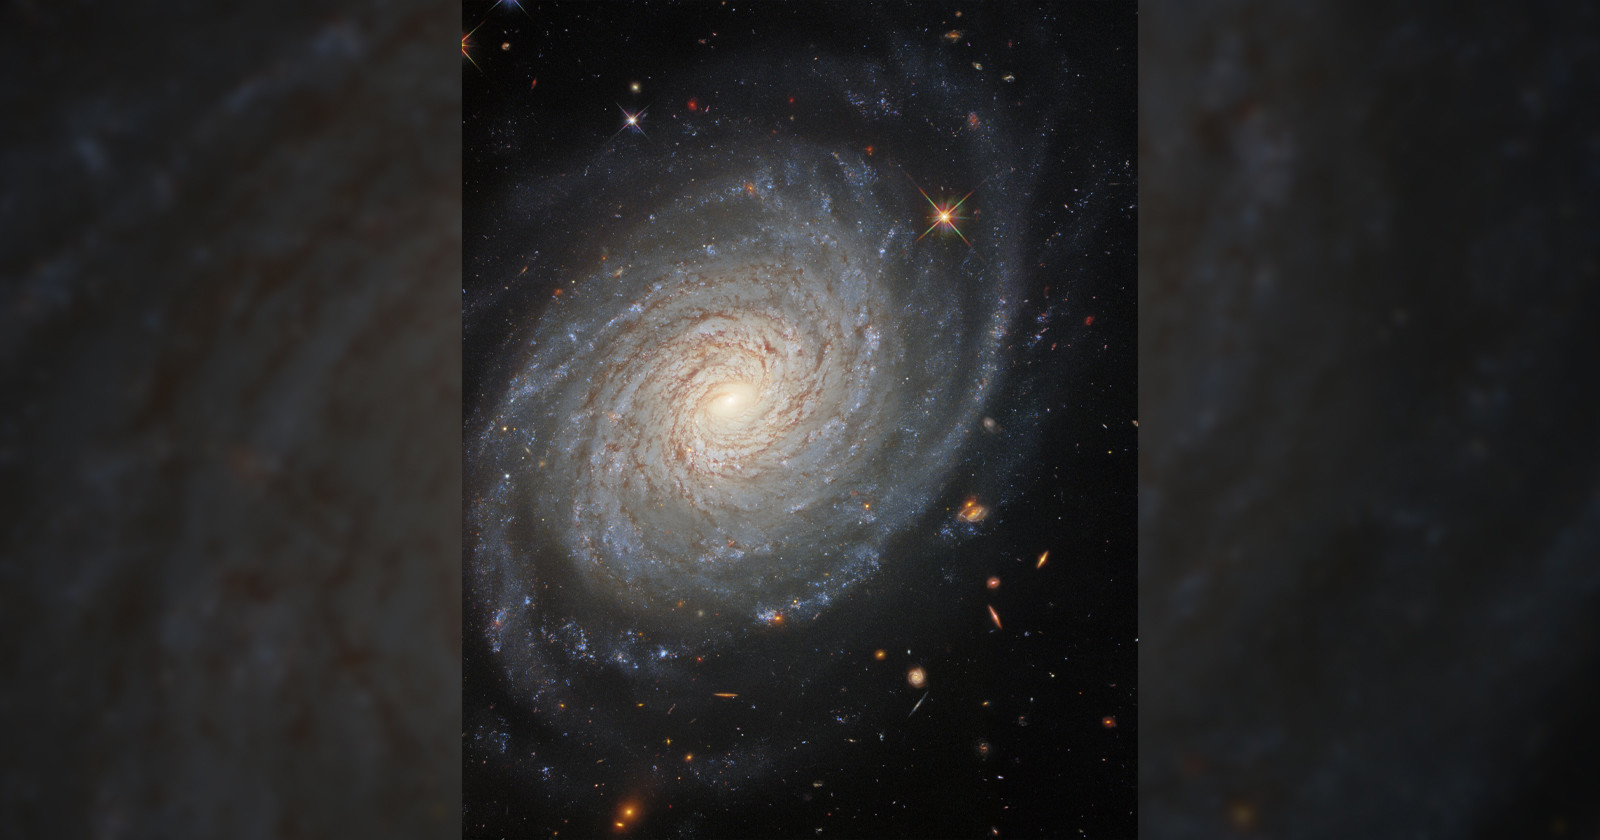 Hubble Captures Majestic Photo of a Galaxy with an ‘Explosive Past’